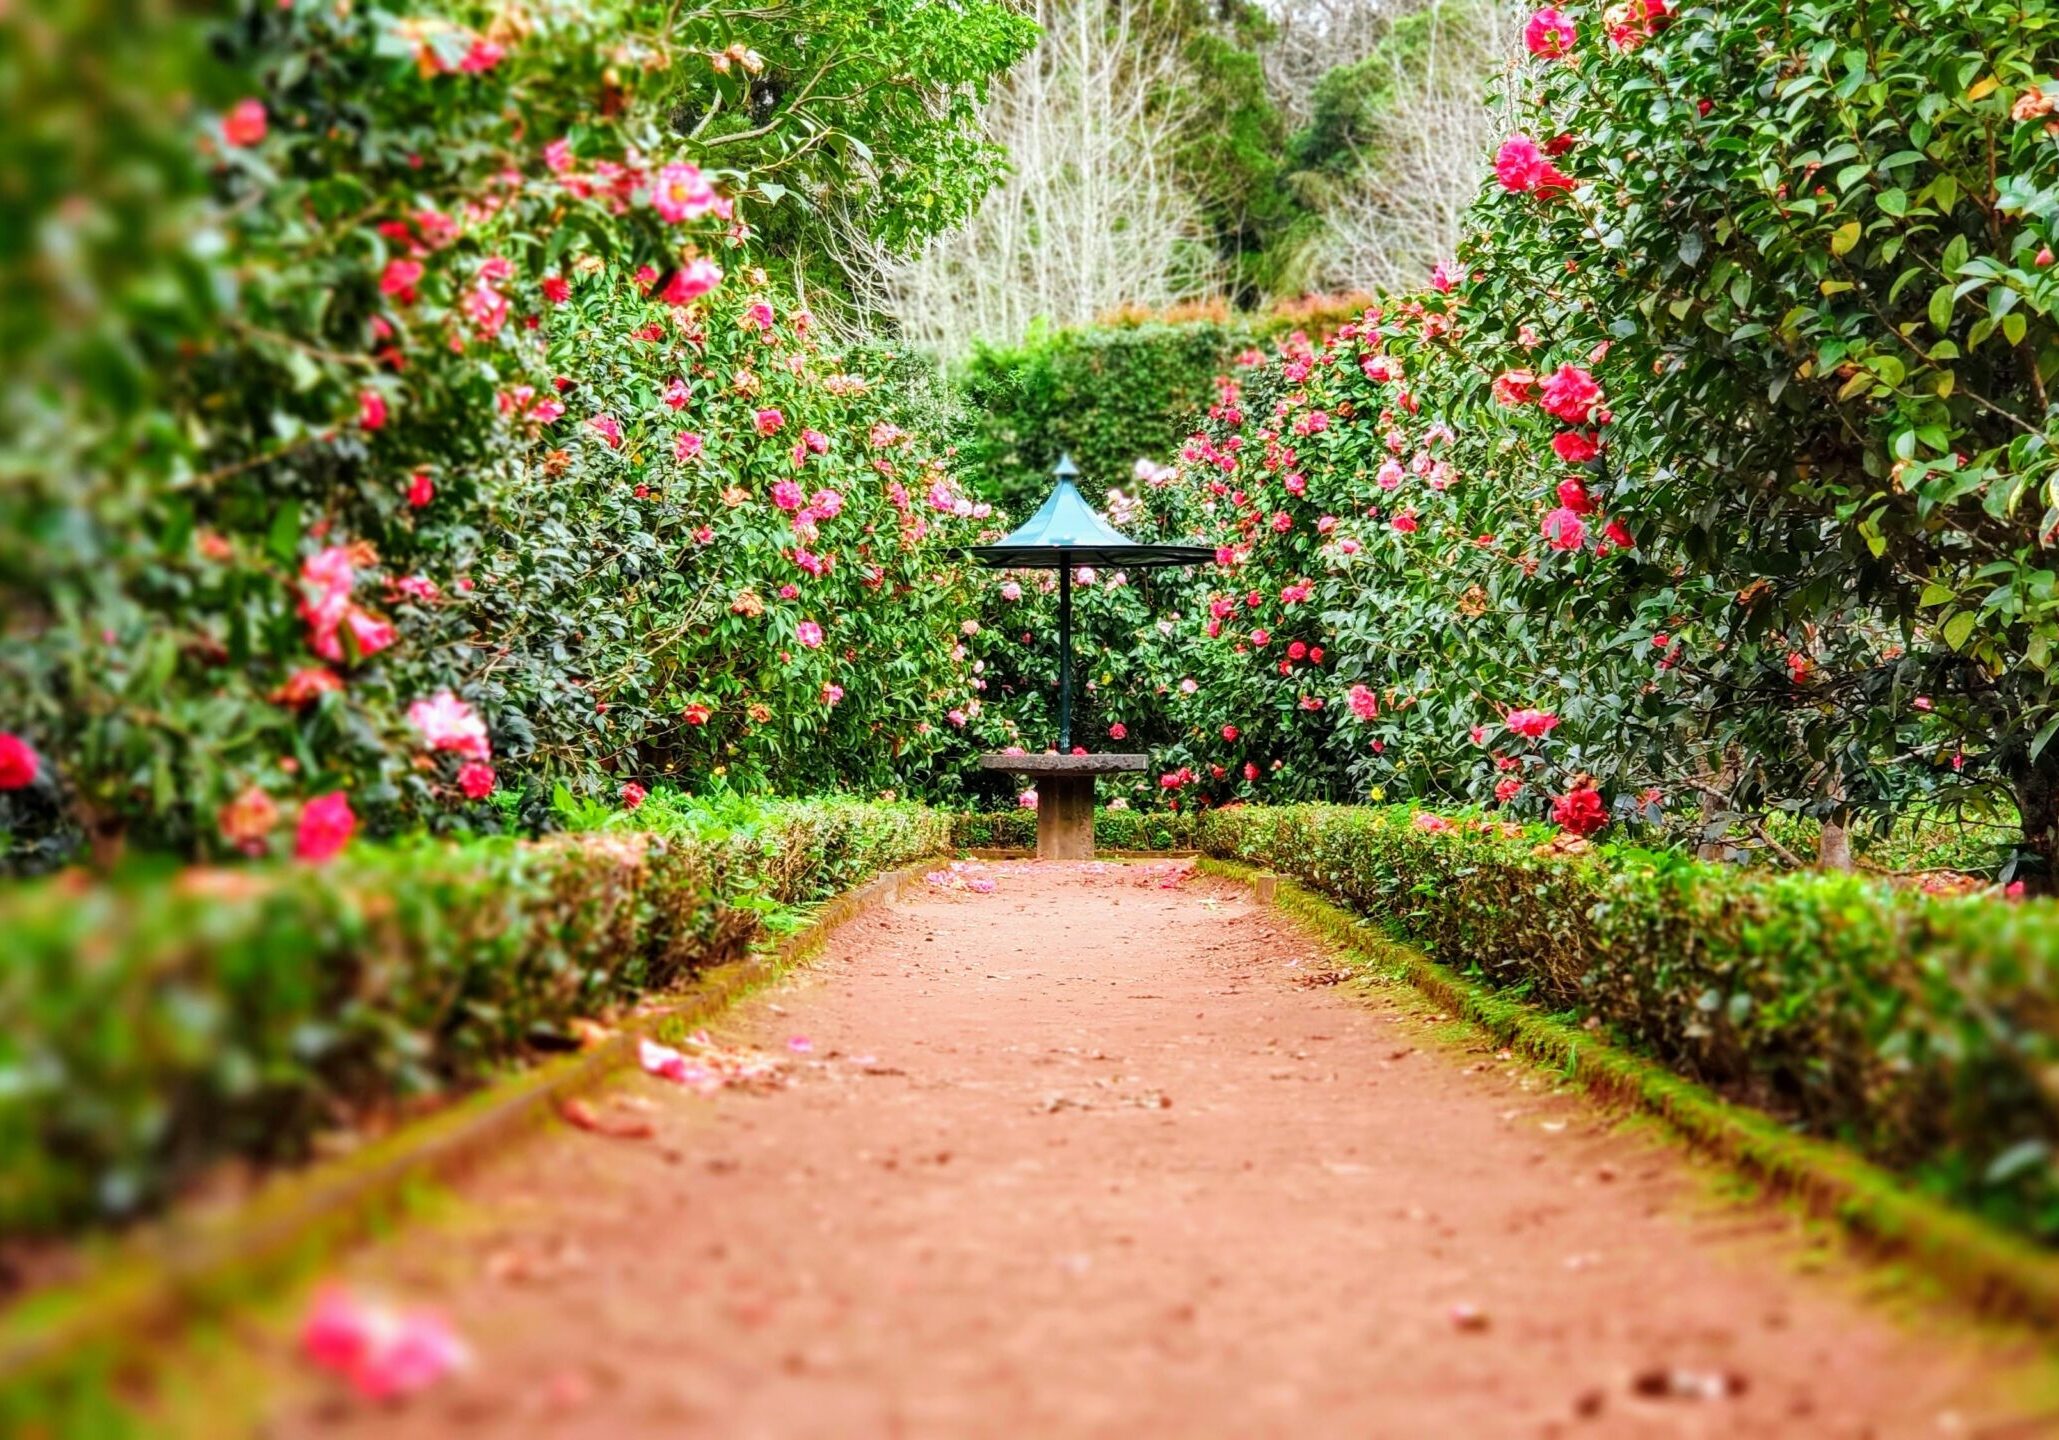 A table in the middle of the Garden. Rose flowers and pink flowers spread through the garden.